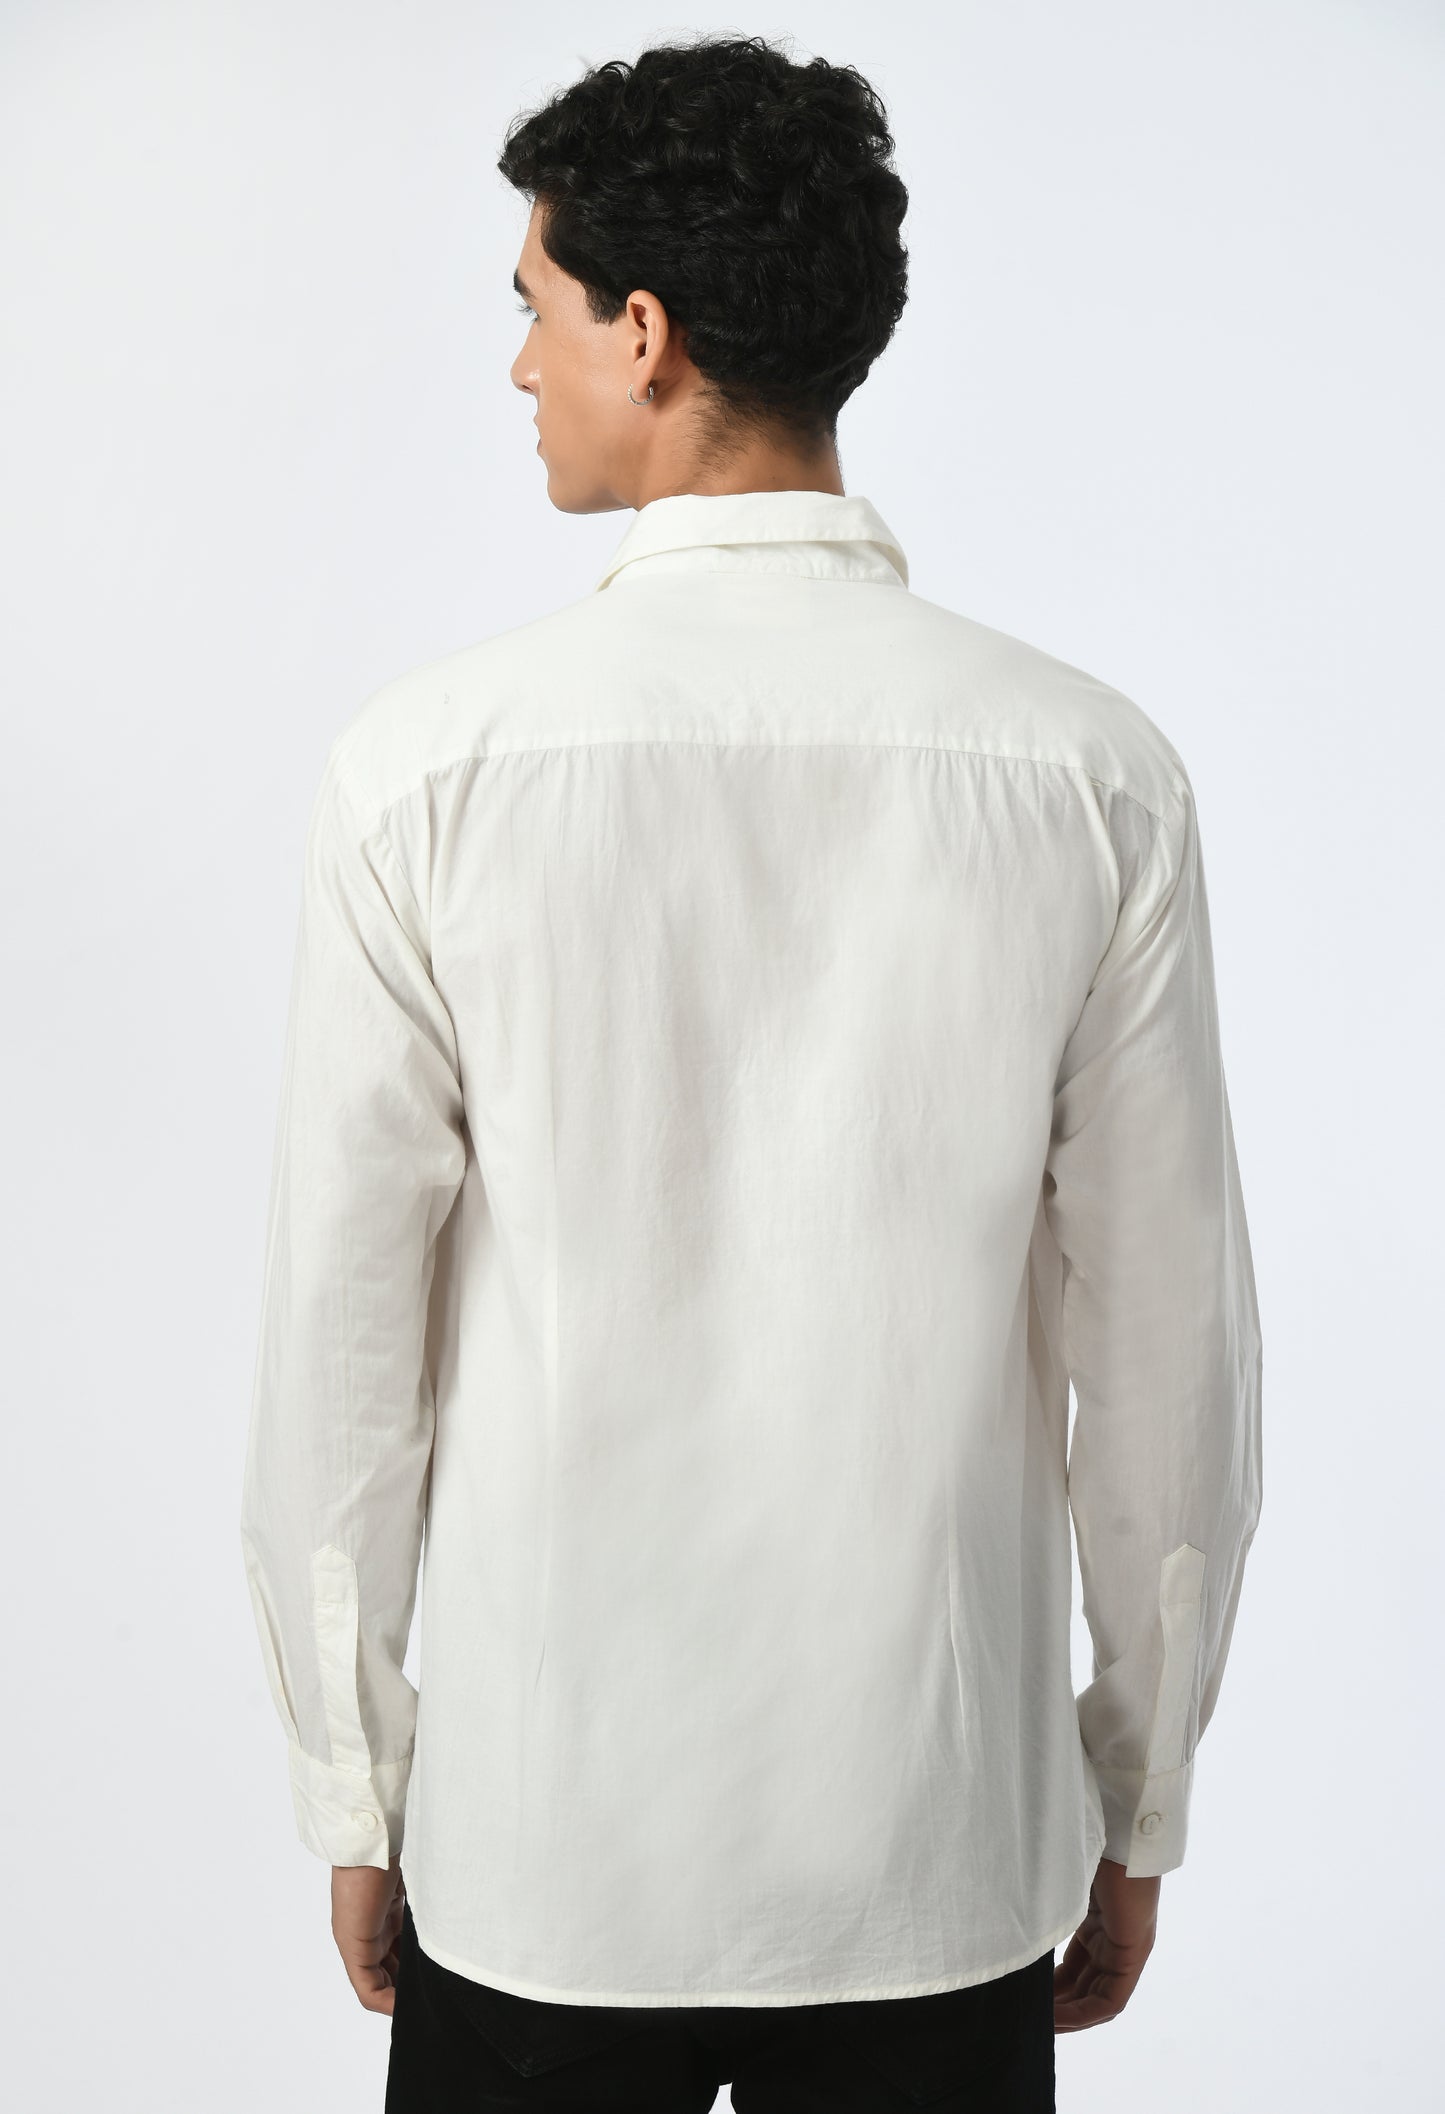 Men's white shirt with classic collar